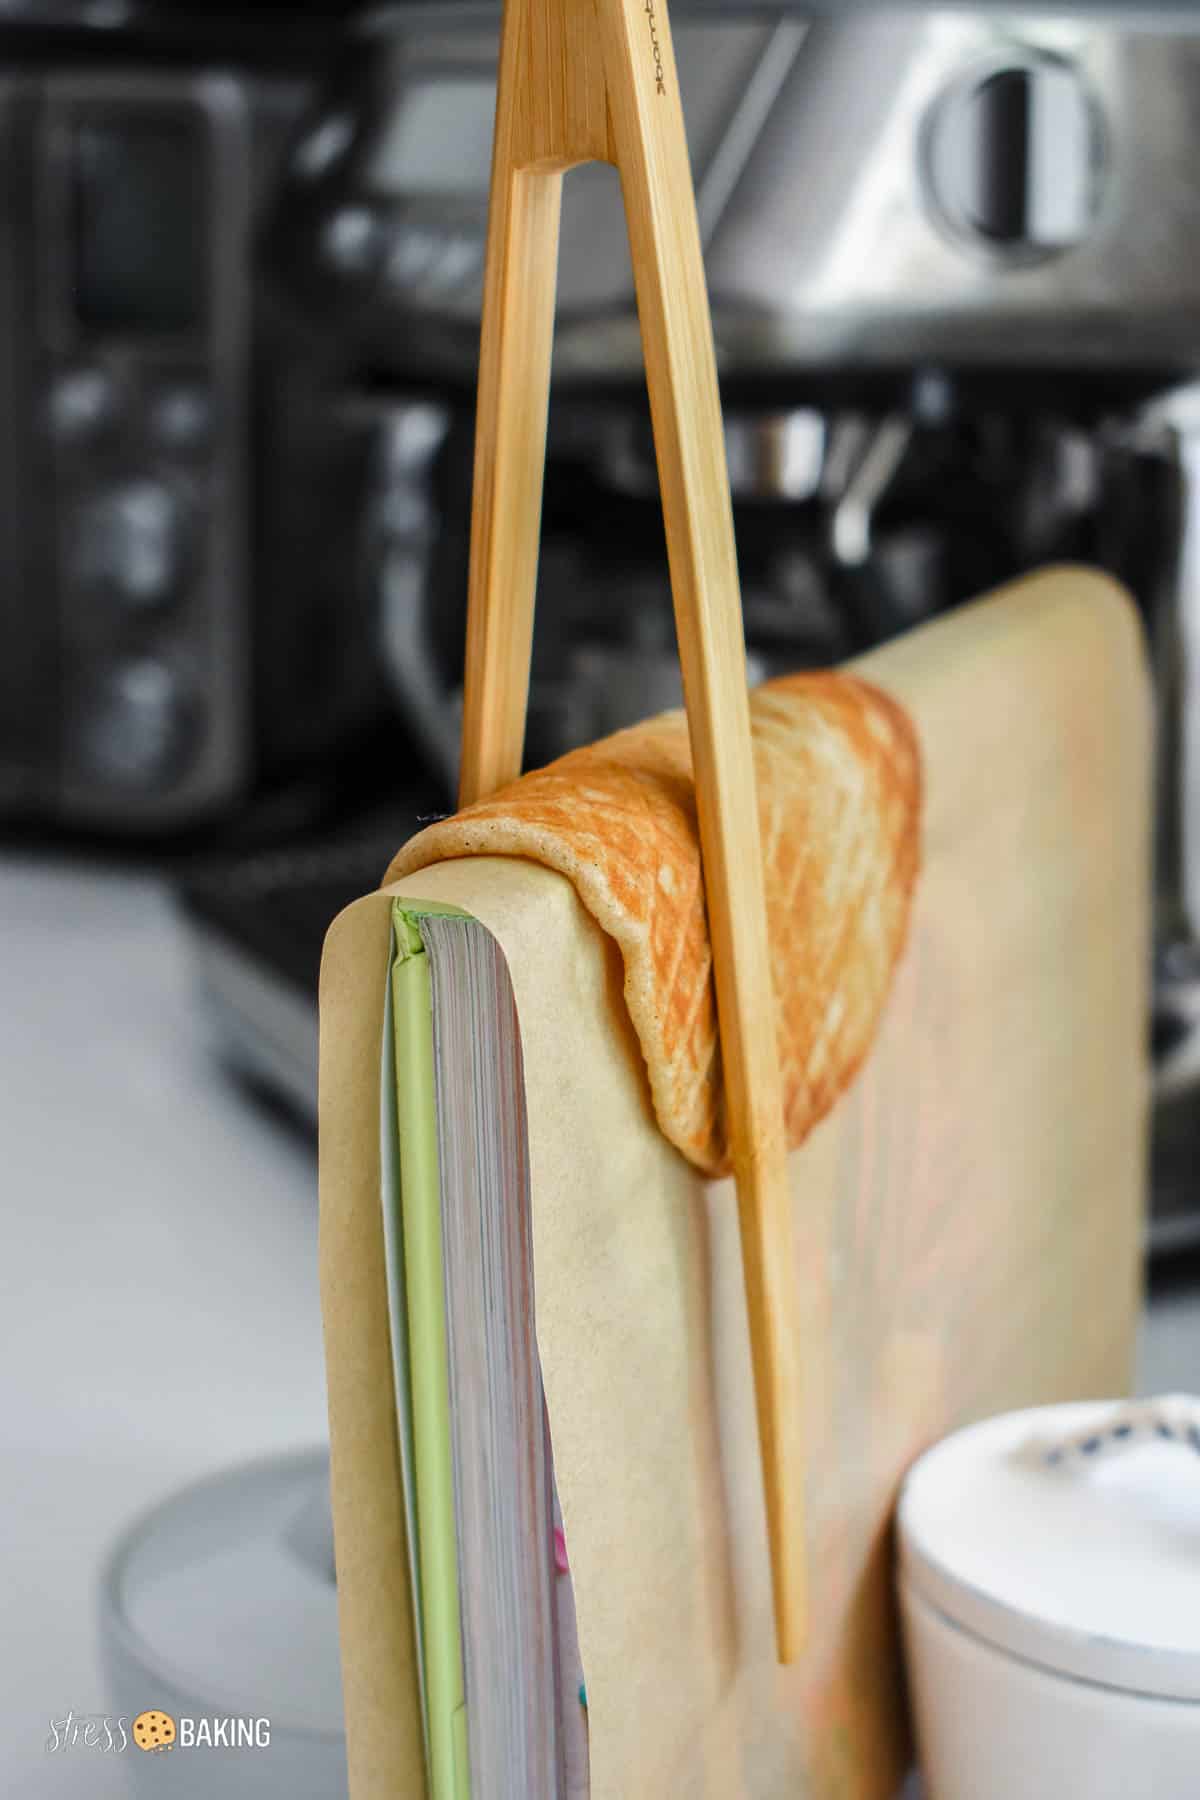 A waffle cone propped on a book binding to form a taco shape